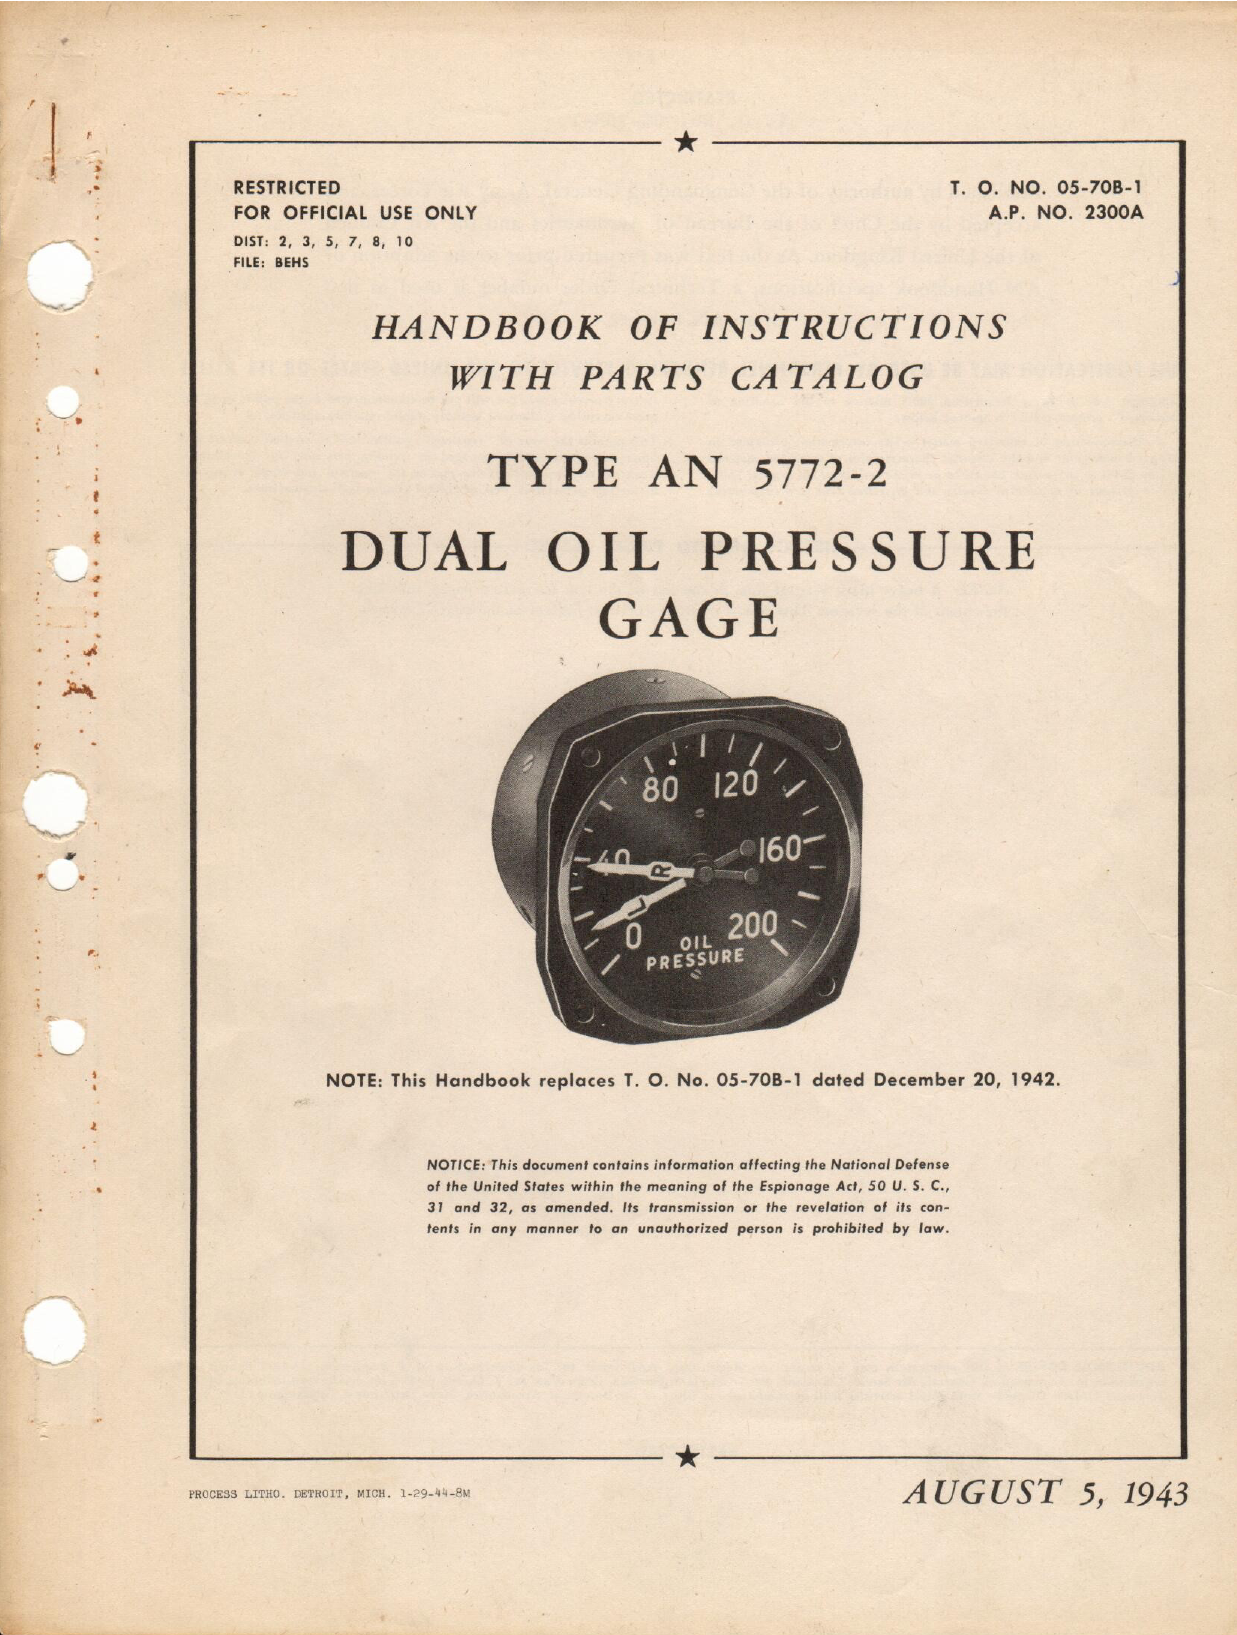 Sample page 1 from AirCorps Library document: Instructions with Parts Catalog for AN 5772-2 Oil Pressure Gage 